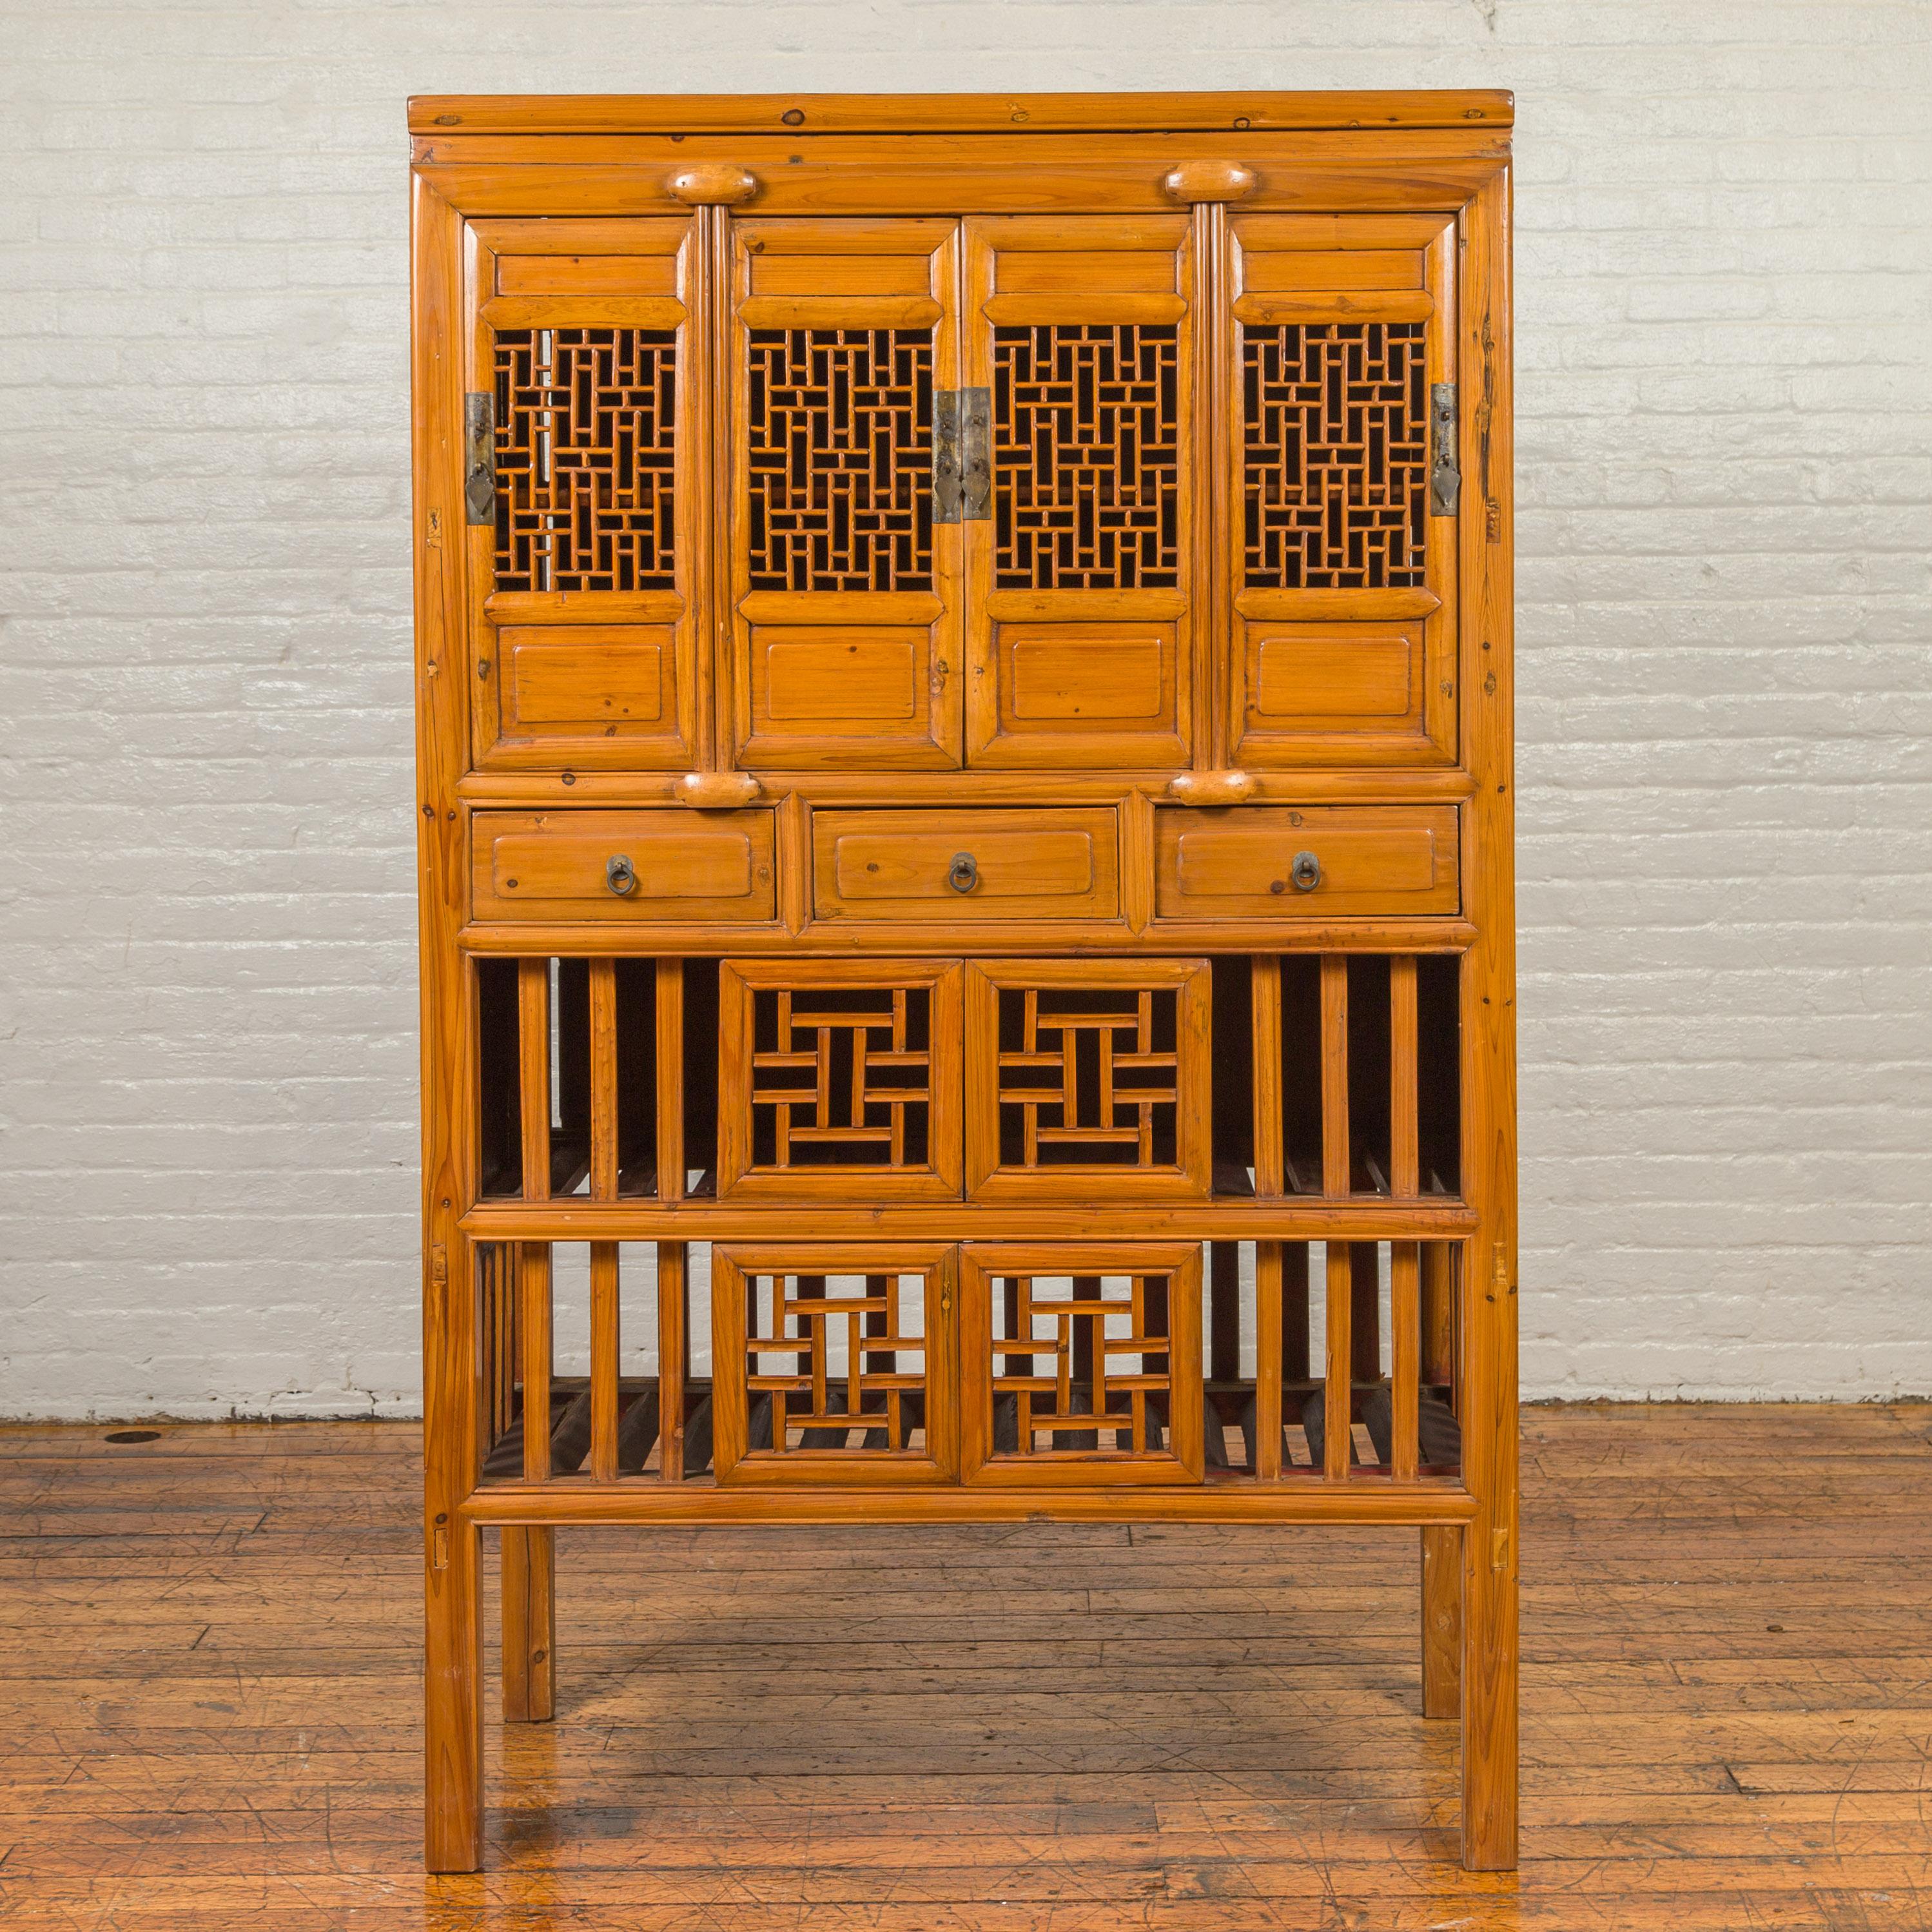 A Chinese Qing dynasty period elmwood kitchen cabinet from the 19th century, with fretwork motifs, doors and sliding panels. Born in China during the 19th century, this elm cabinet features four doors, each adorned with fretwork motifs and opening